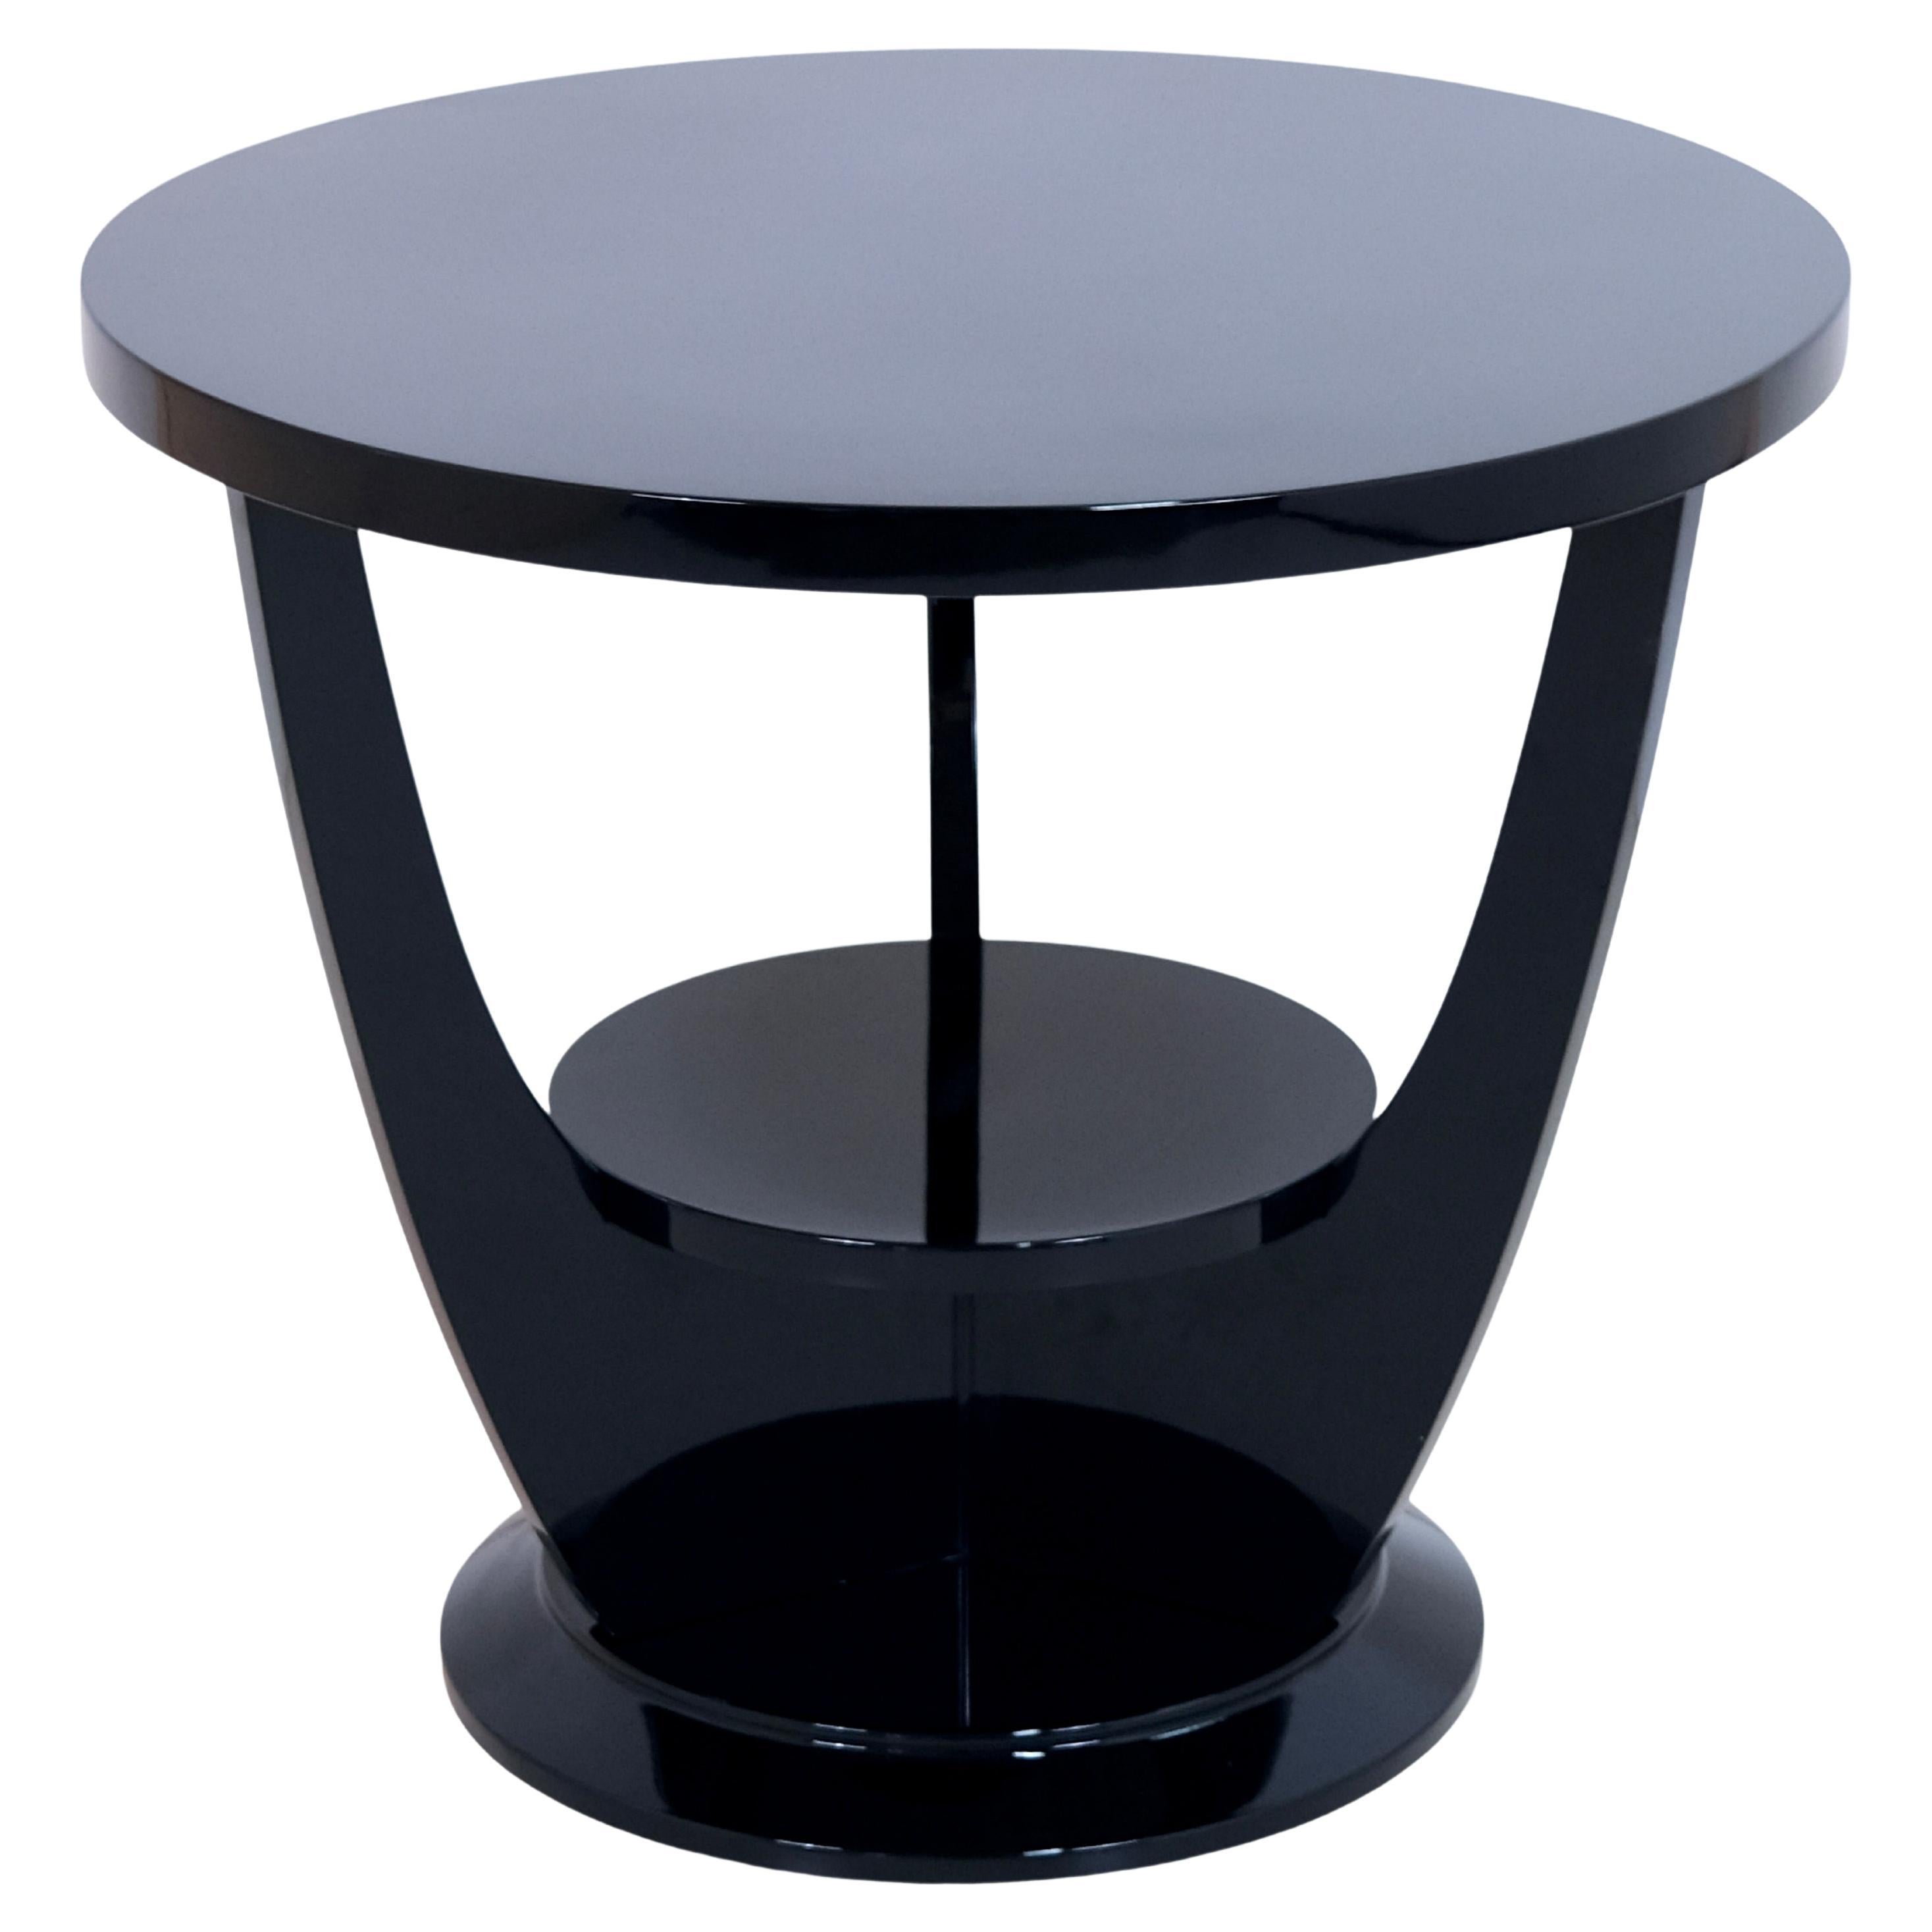 Round 1930's French Art Deco Side Table in Black Lacquer with Intermediate Shelf